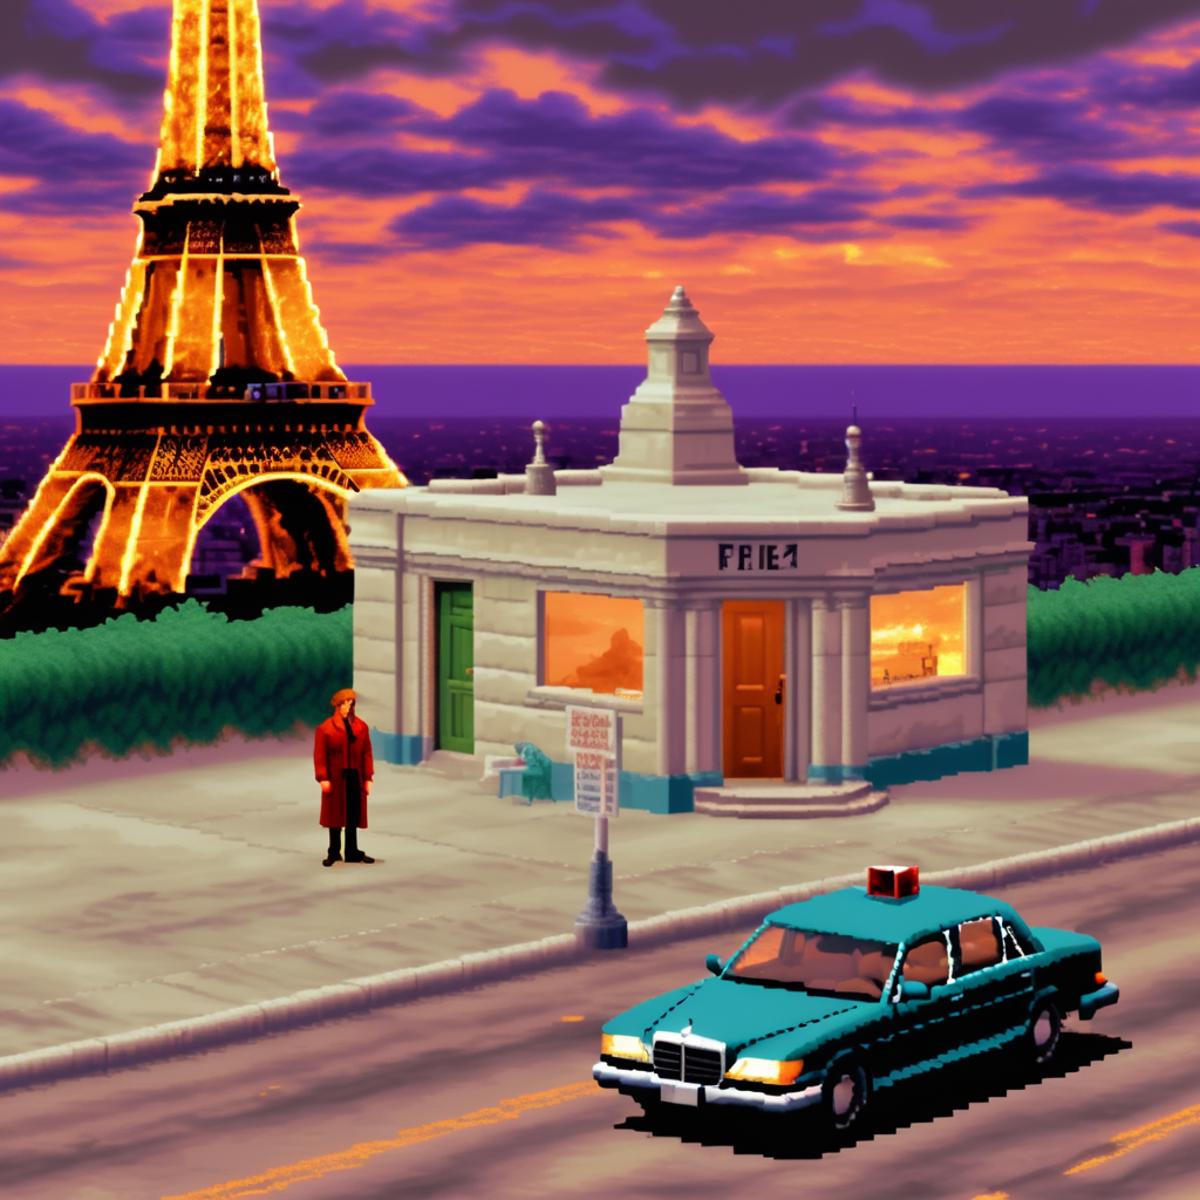 "LucasArts Style" (1990s PC Adventure Games) - SDXL LoRA - (Dreambooth Trained) image by DSlater